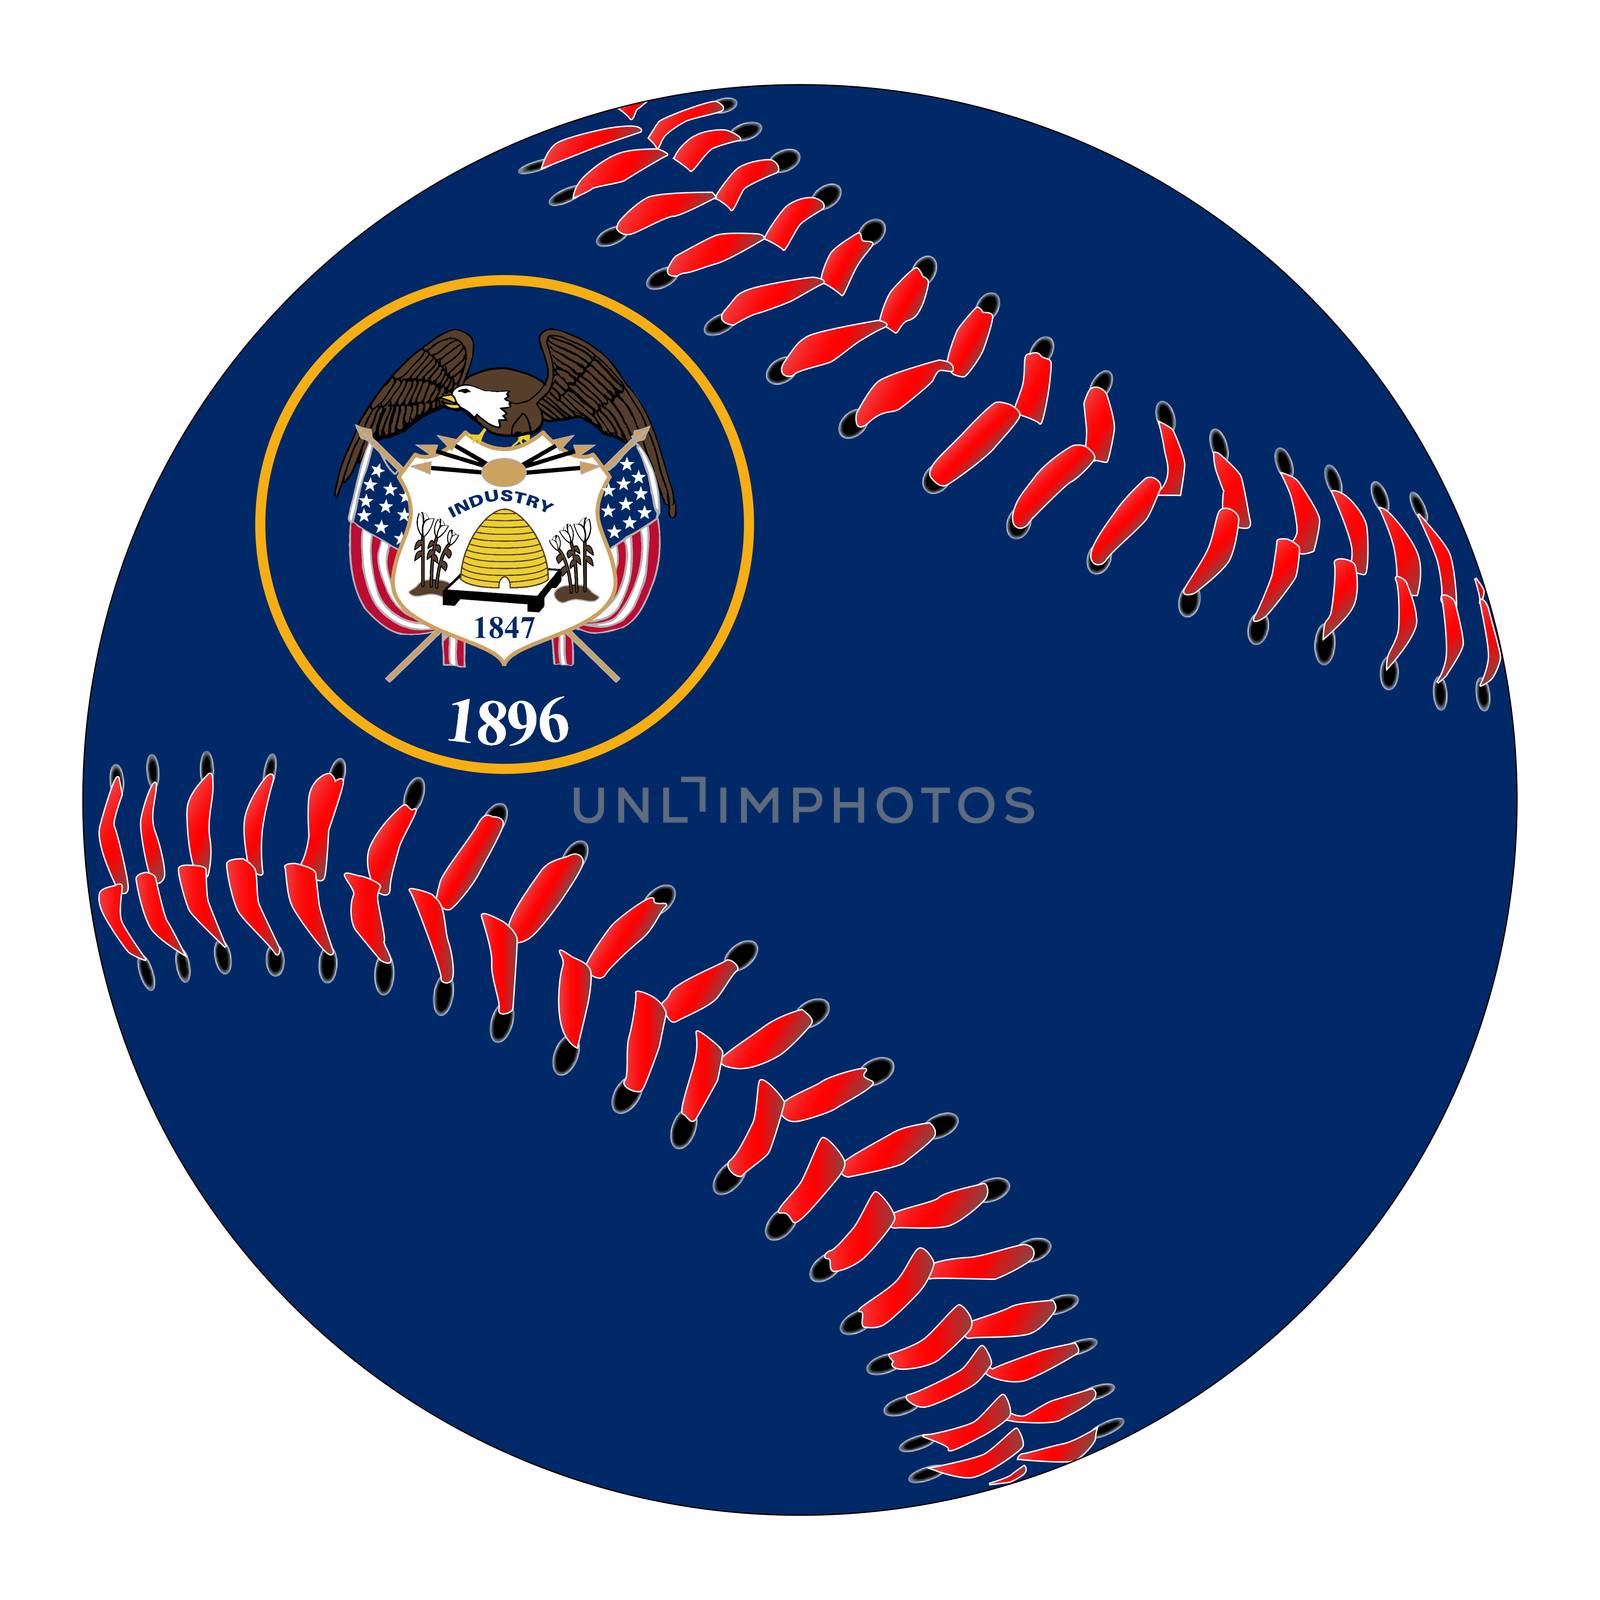 A new white baseball with red stitching with the Utah state flag overlay isolated on white